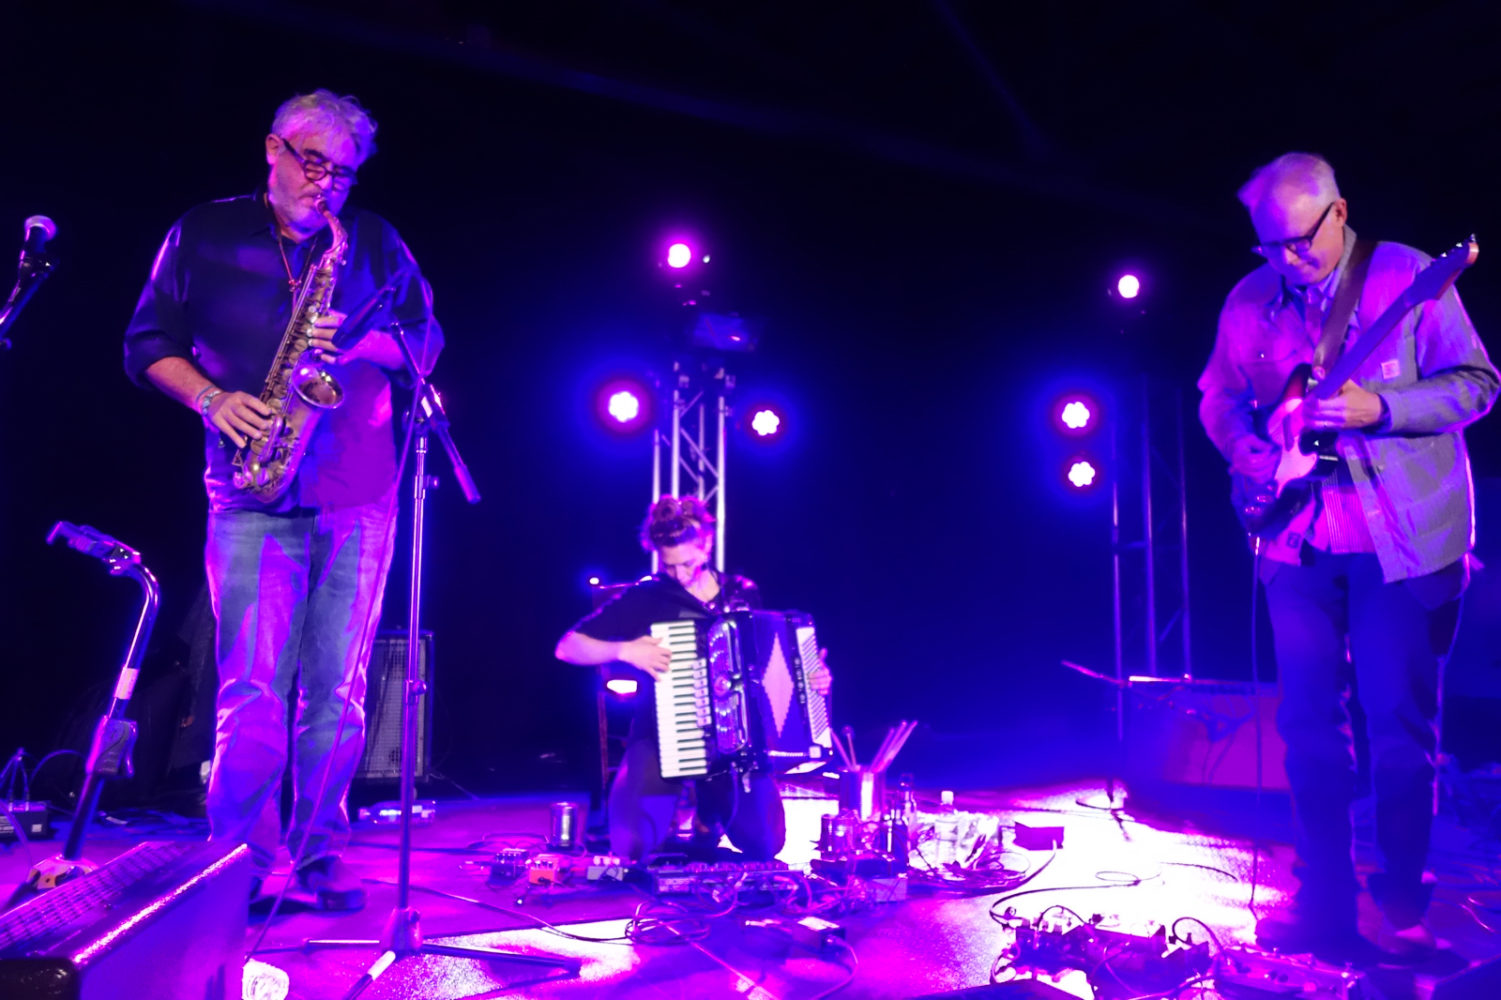 Absînt with David Torn, Tim Berne, Aurora Nealand and Bill Frisell performing at Big Ears in Knoxville, Tennessee 2019